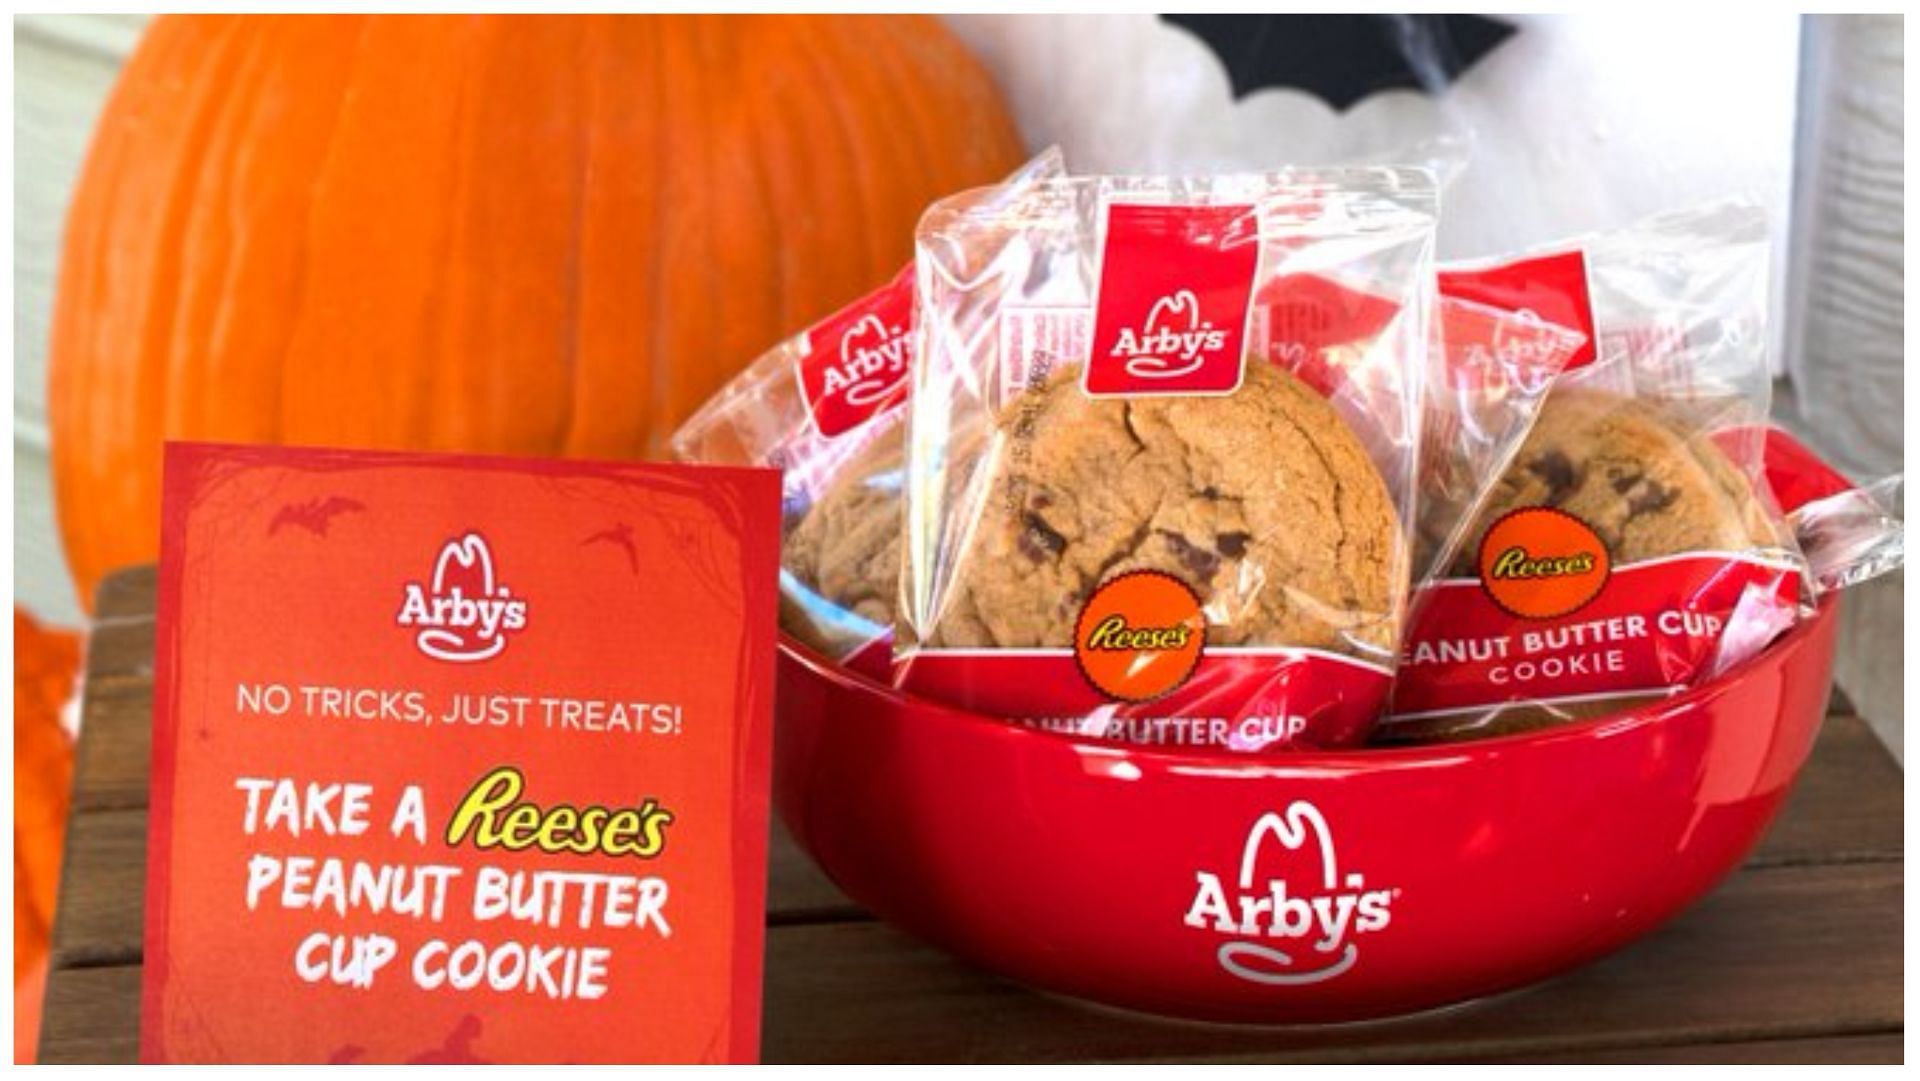 Reese&rsquo;s Peanut Butter Cup Cookie at Arby&rsquo;s (Image via Twitter/Arby